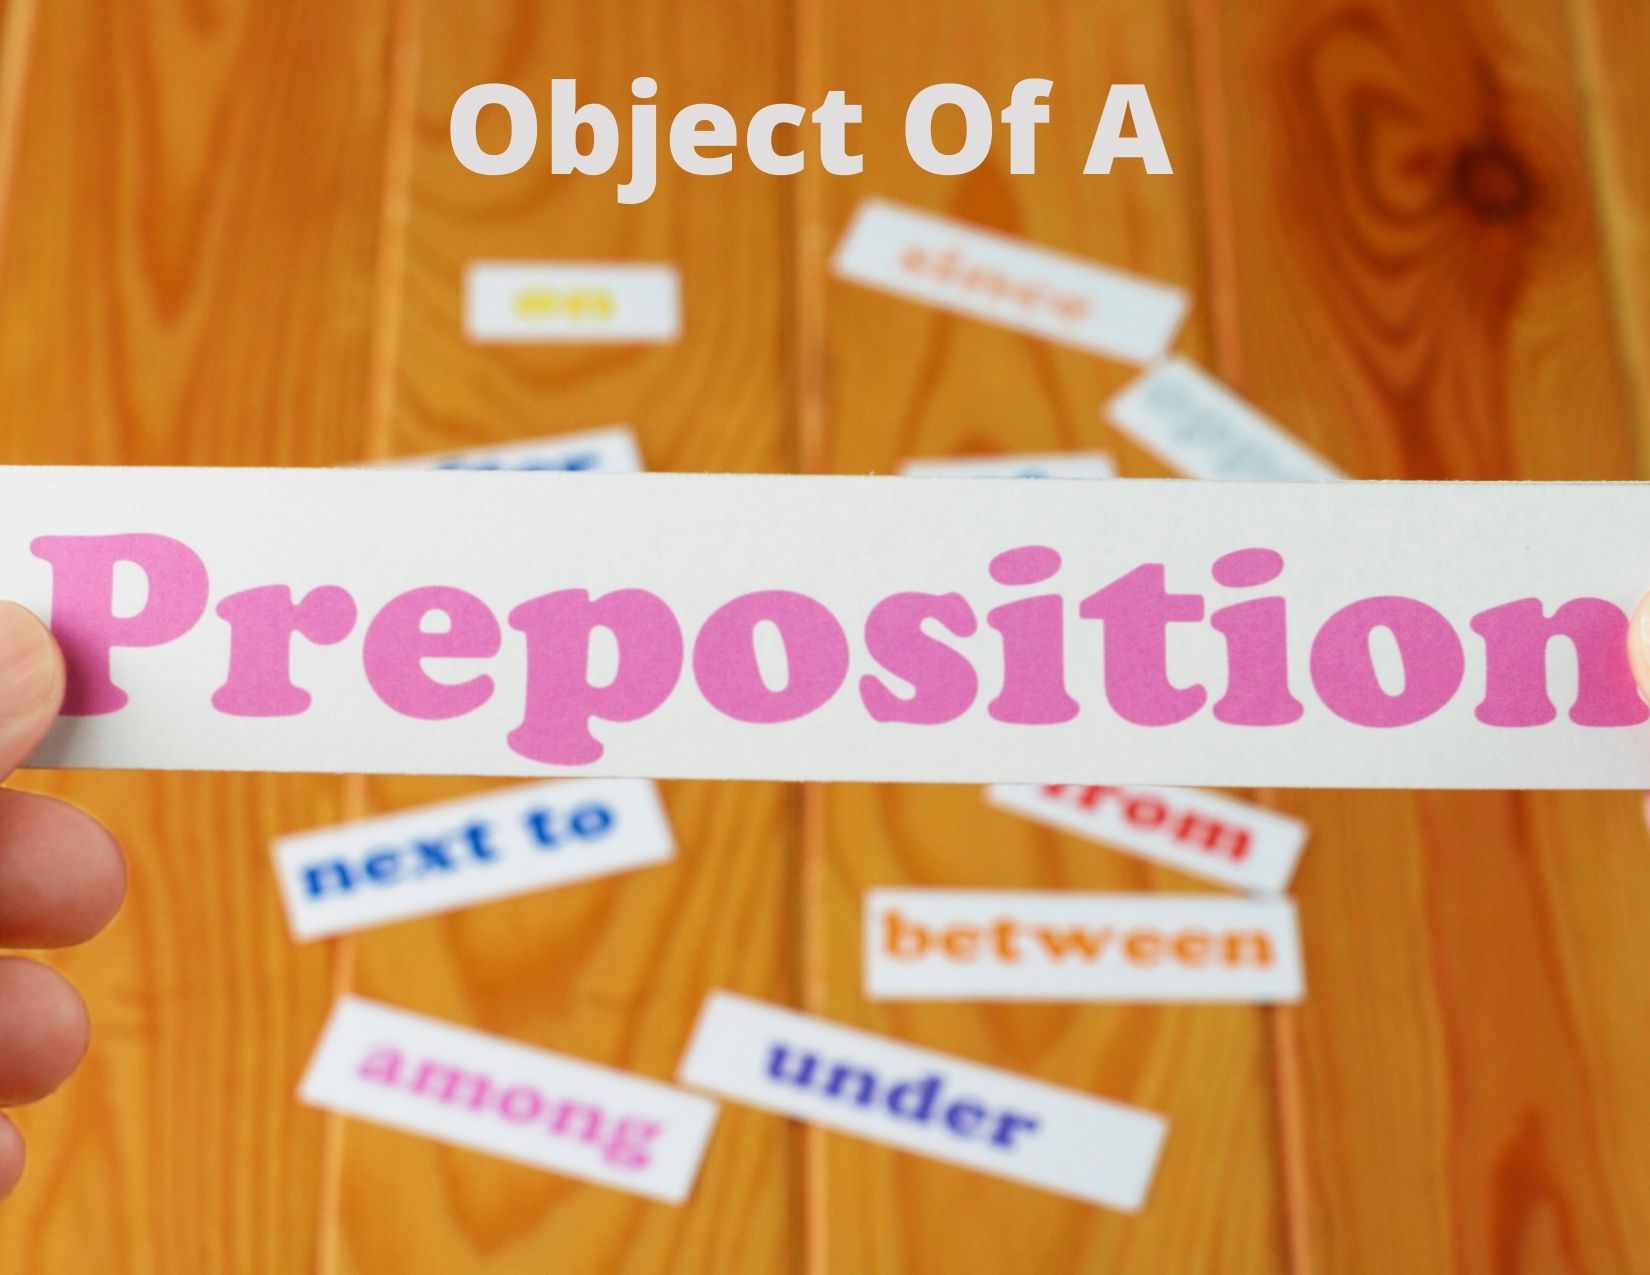 a graphic with scattered pieces of papers with various prepositions, along with the words "Object of a Preposition"